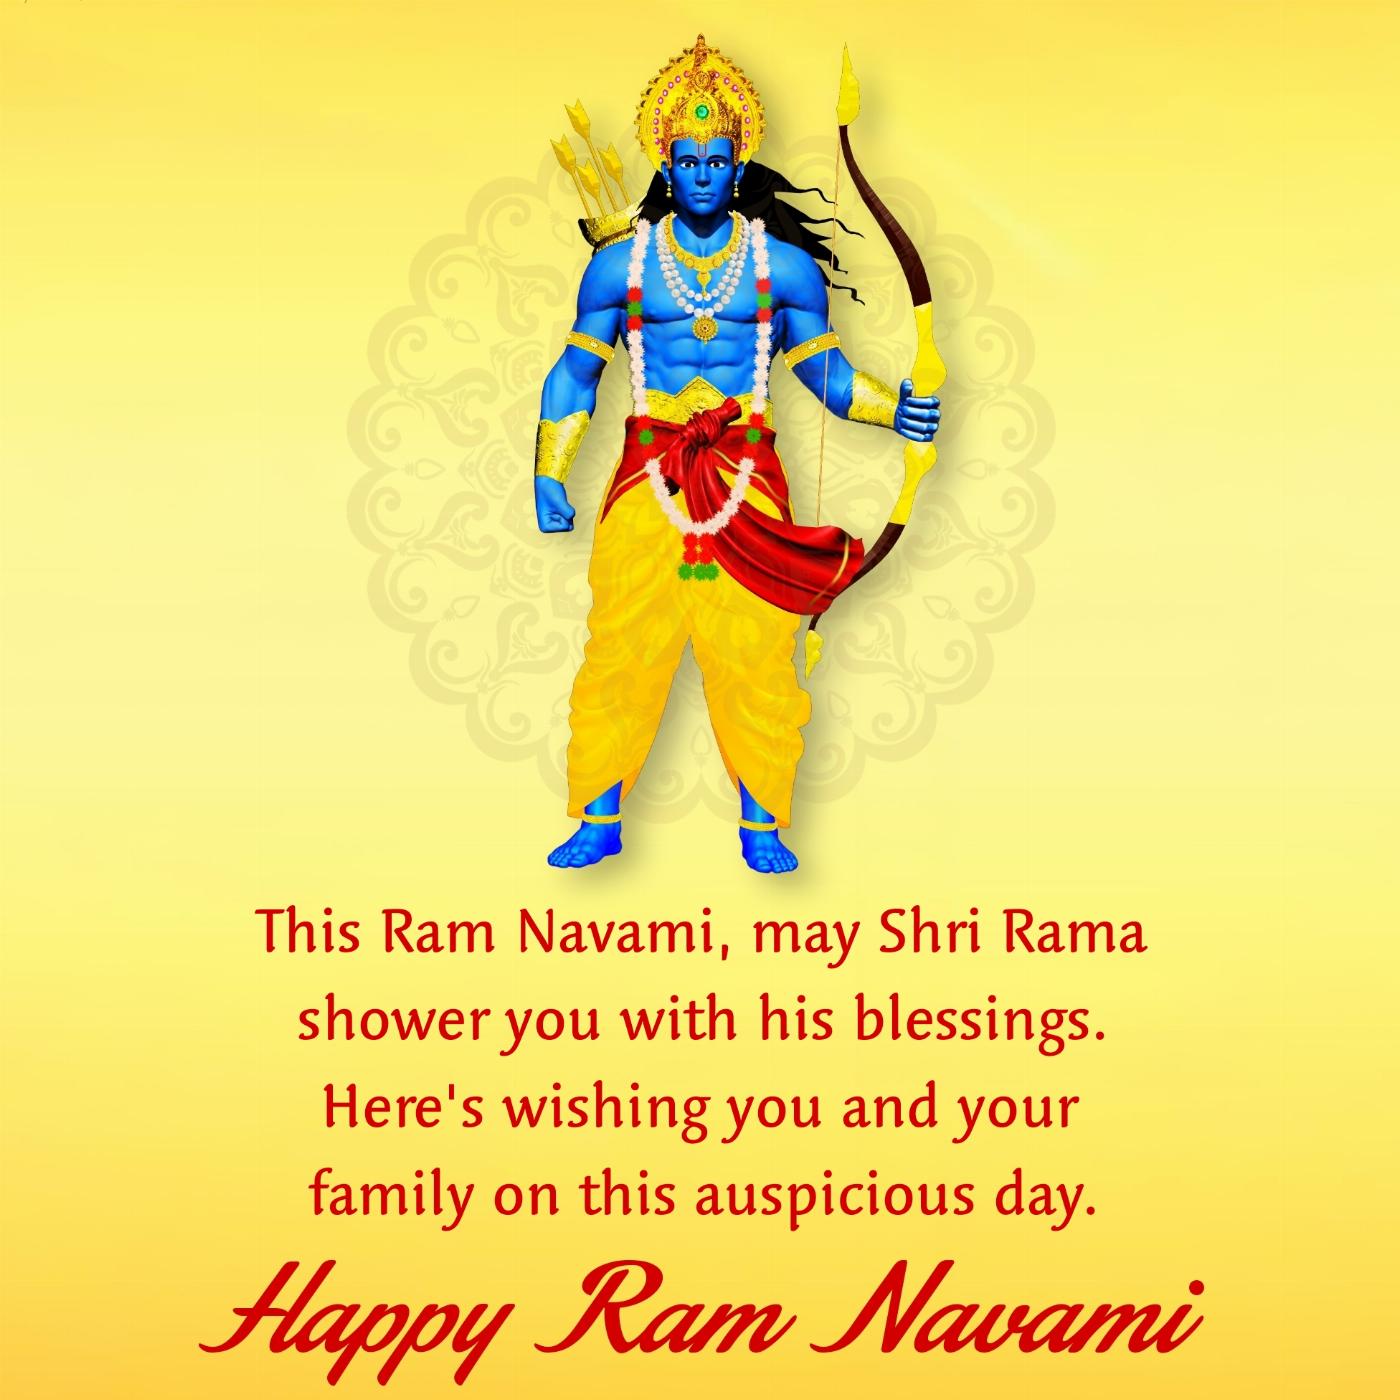 This Ram Navami may Shri Rama shower you with his blessings